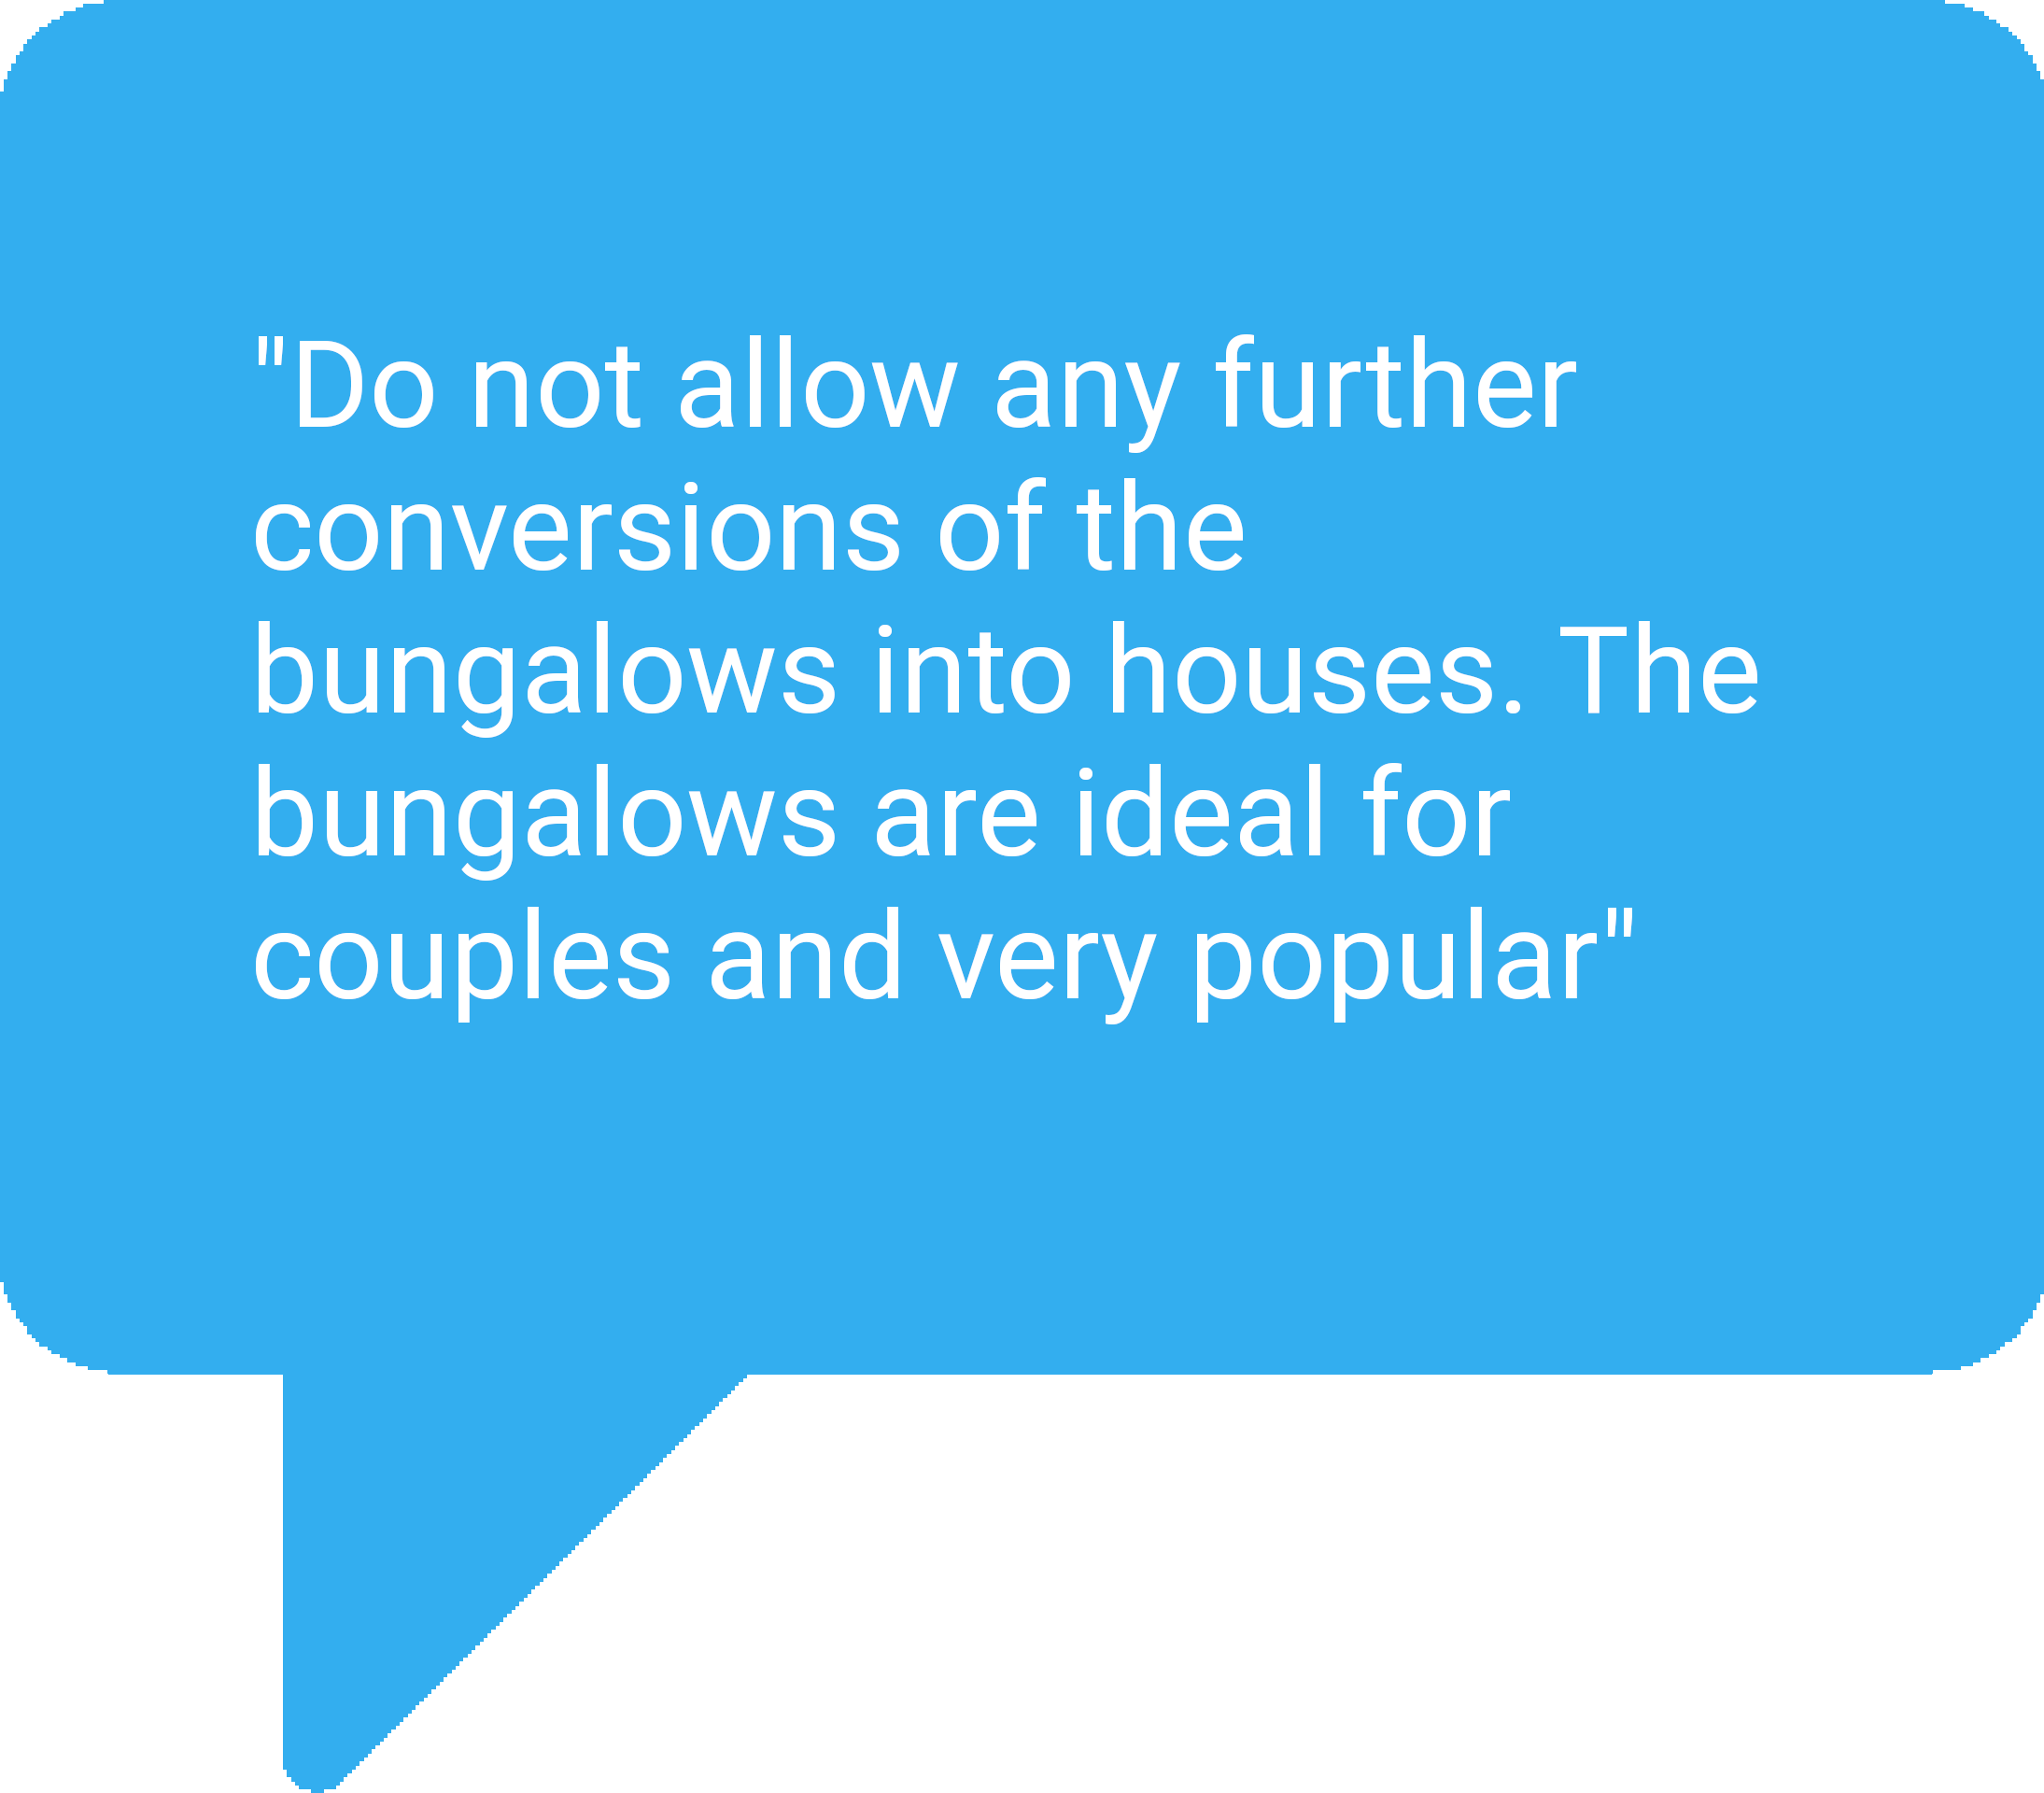 Speech bubble with caption: Do not allow any further conversions of the bungalows into houses. The bungalows are ideal for couples and very popular